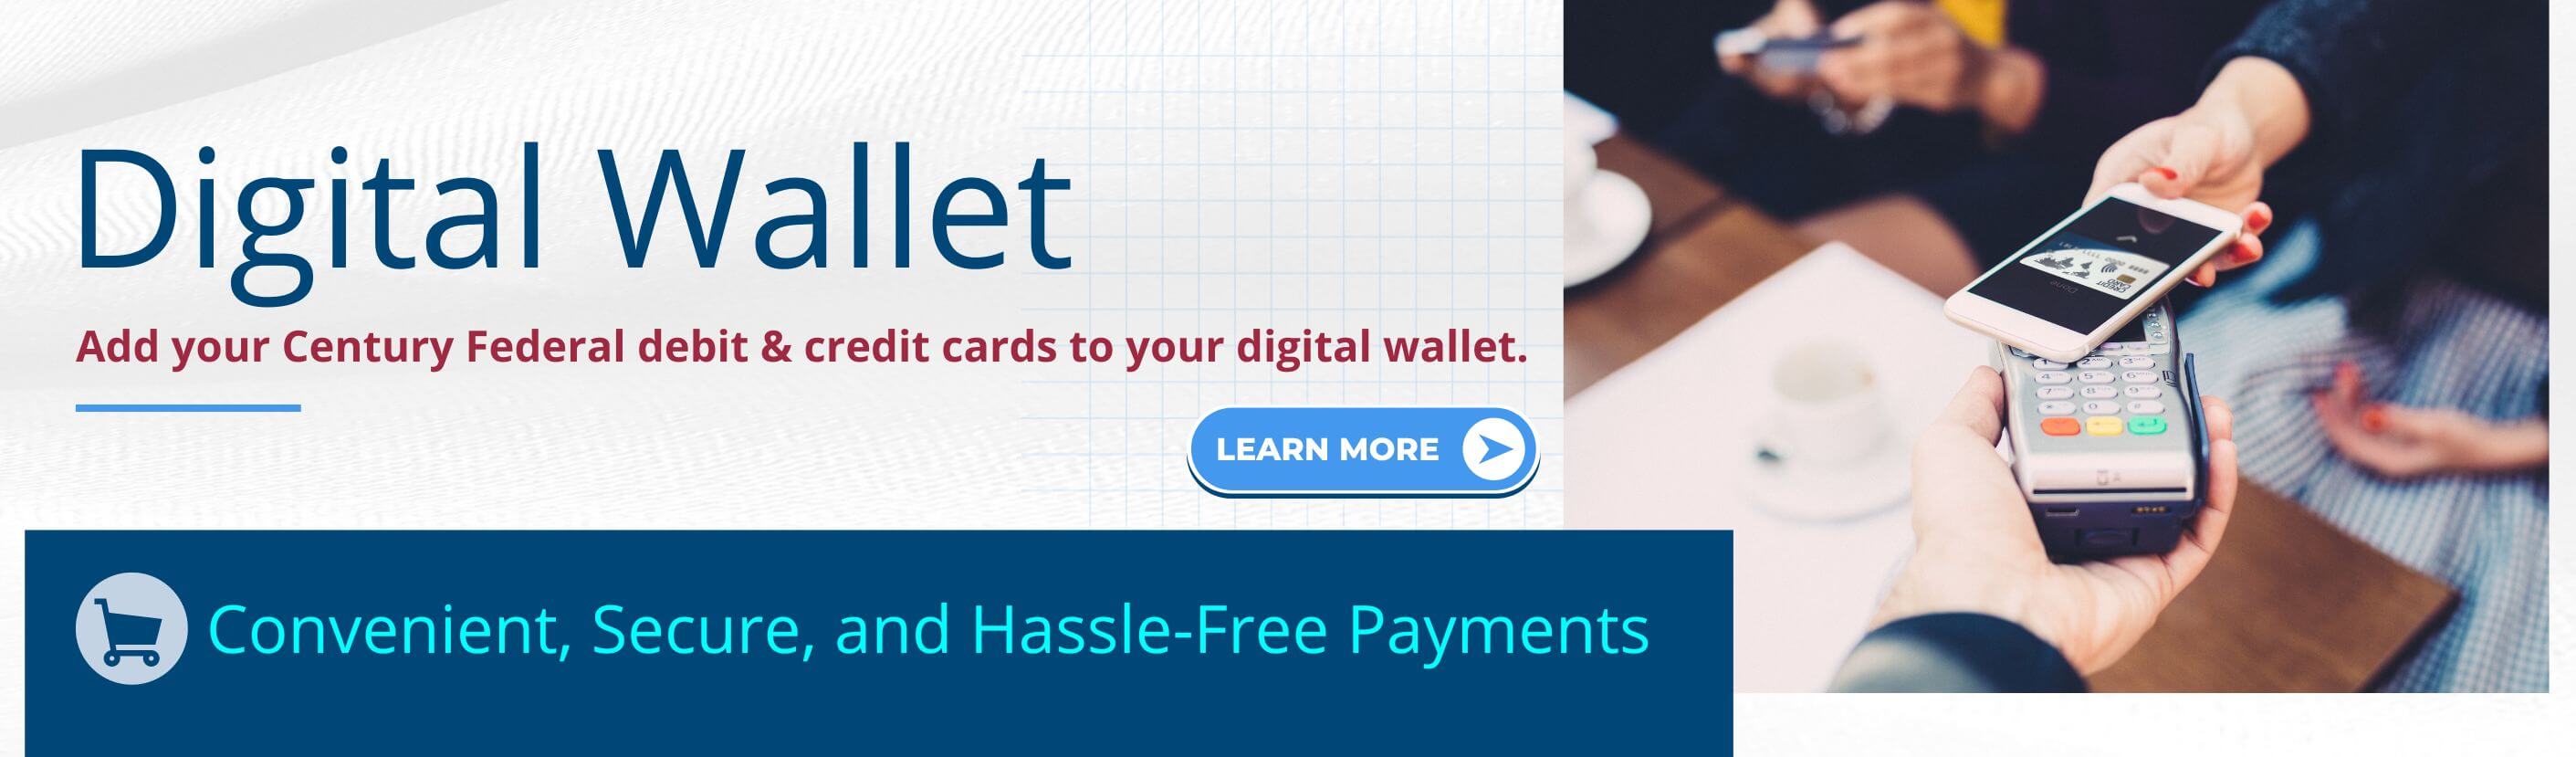 Digital Wallet. Add your CFCU debit and credit cards to your digital wallet